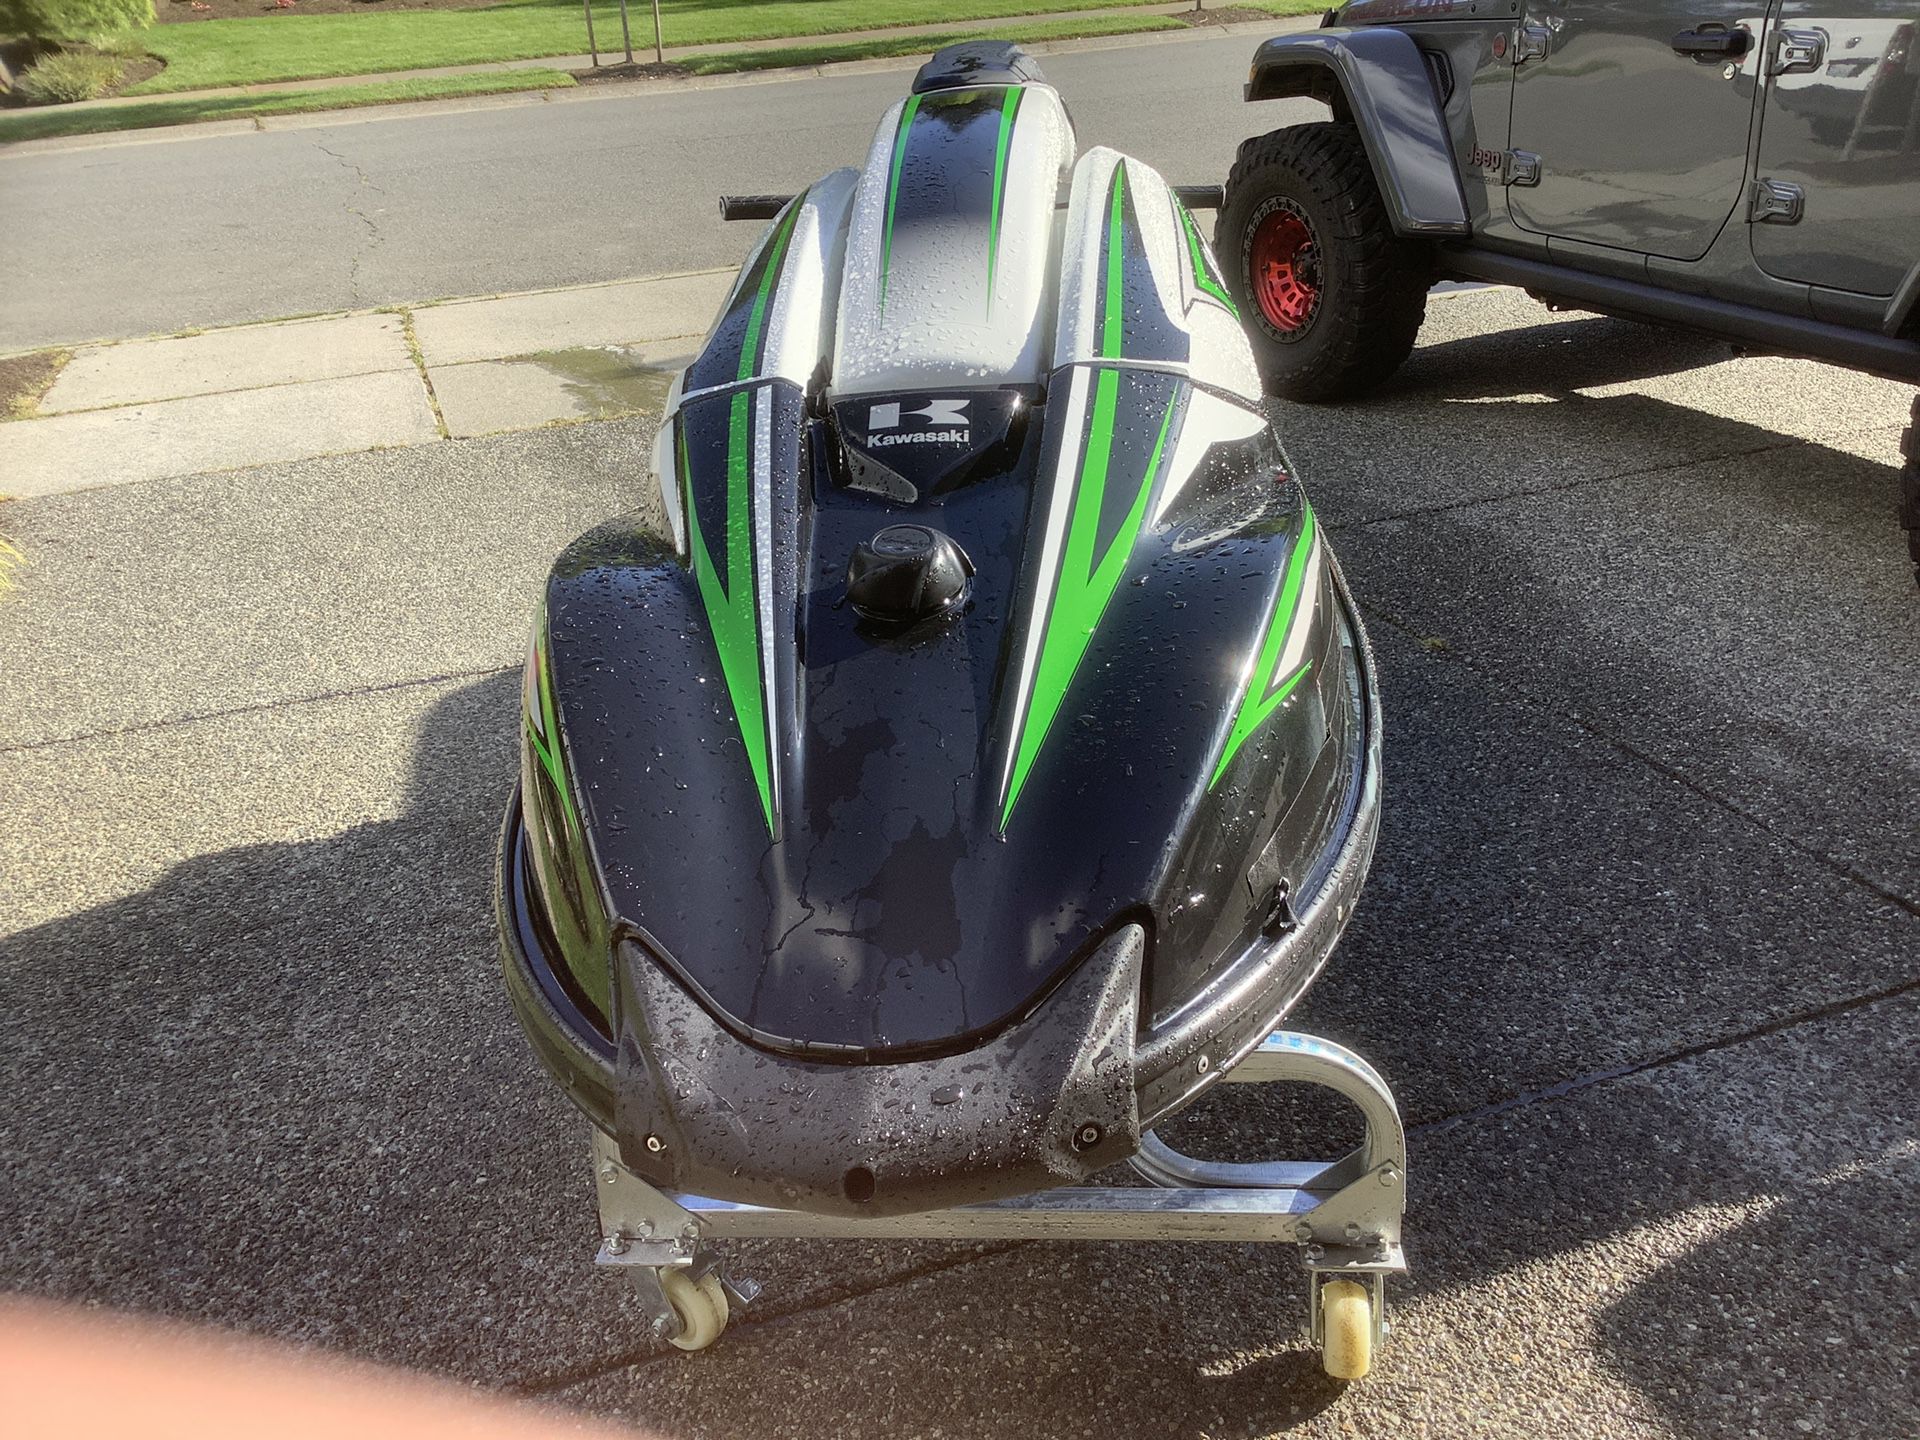 Kawasaki 1500 sxr 1000 in upgrades plus 1000 aluminum trailer included Cart also included trailer is Triton one place aluminum trailer jet ski